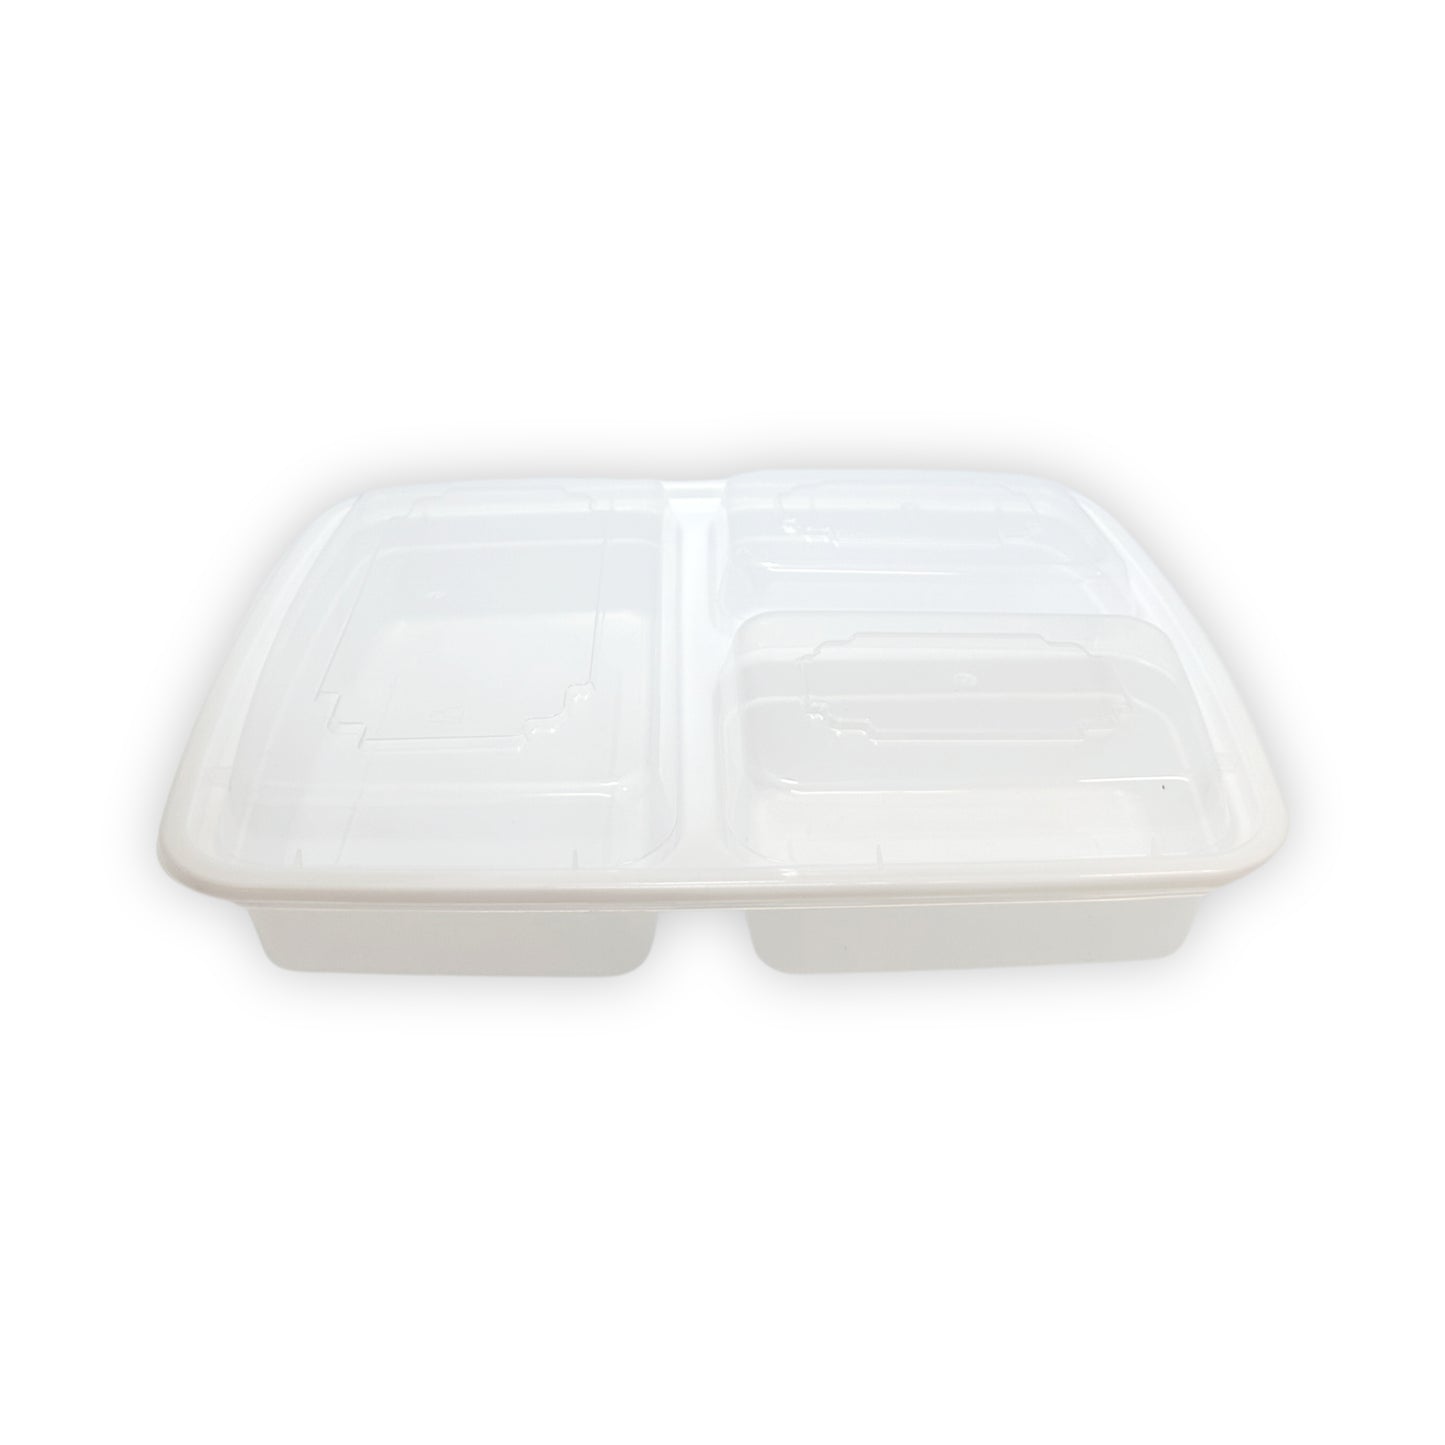 KIS-KY339G | 150sets 39oz, 1153ml 3-Compartment White PP Rectangle Container with Clear Lids Combo; $0.345/set